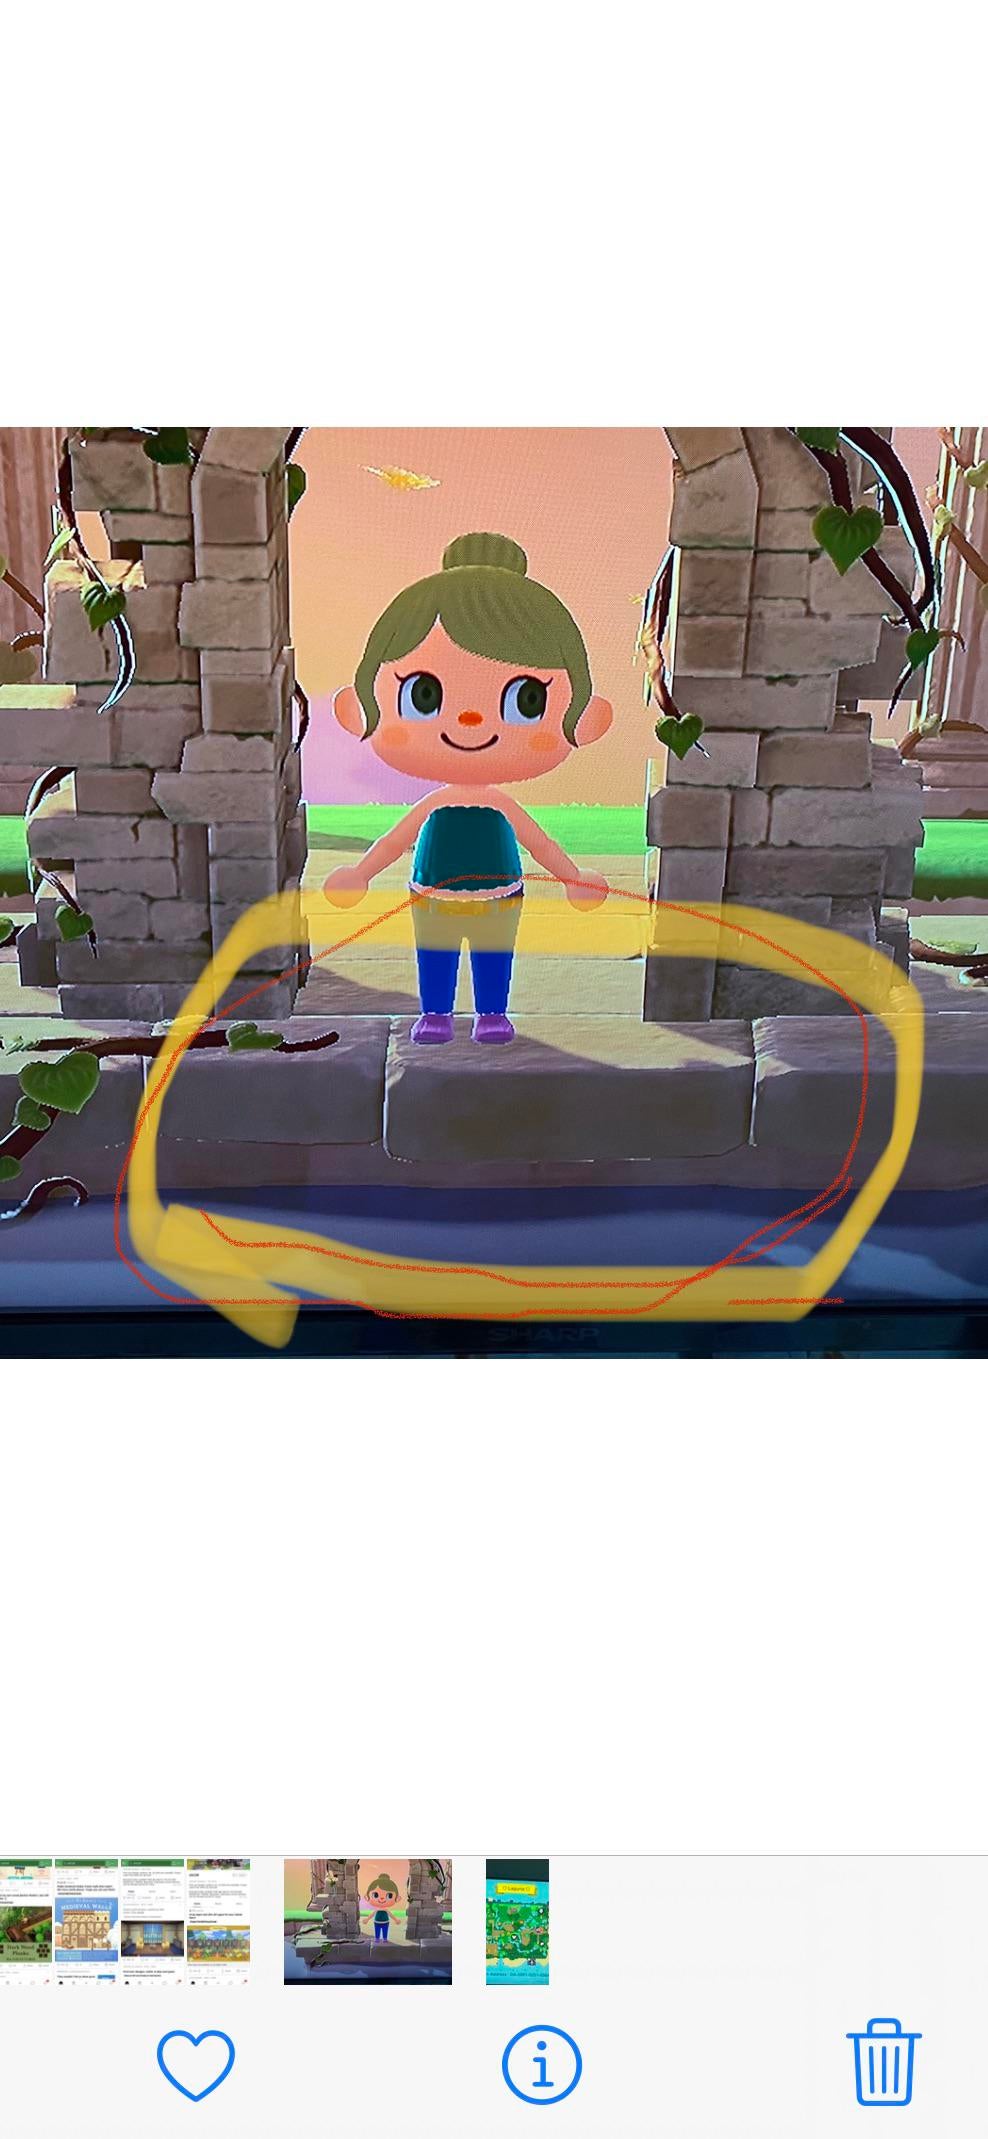 Animal Crossing Possible to customize the edge of tile like